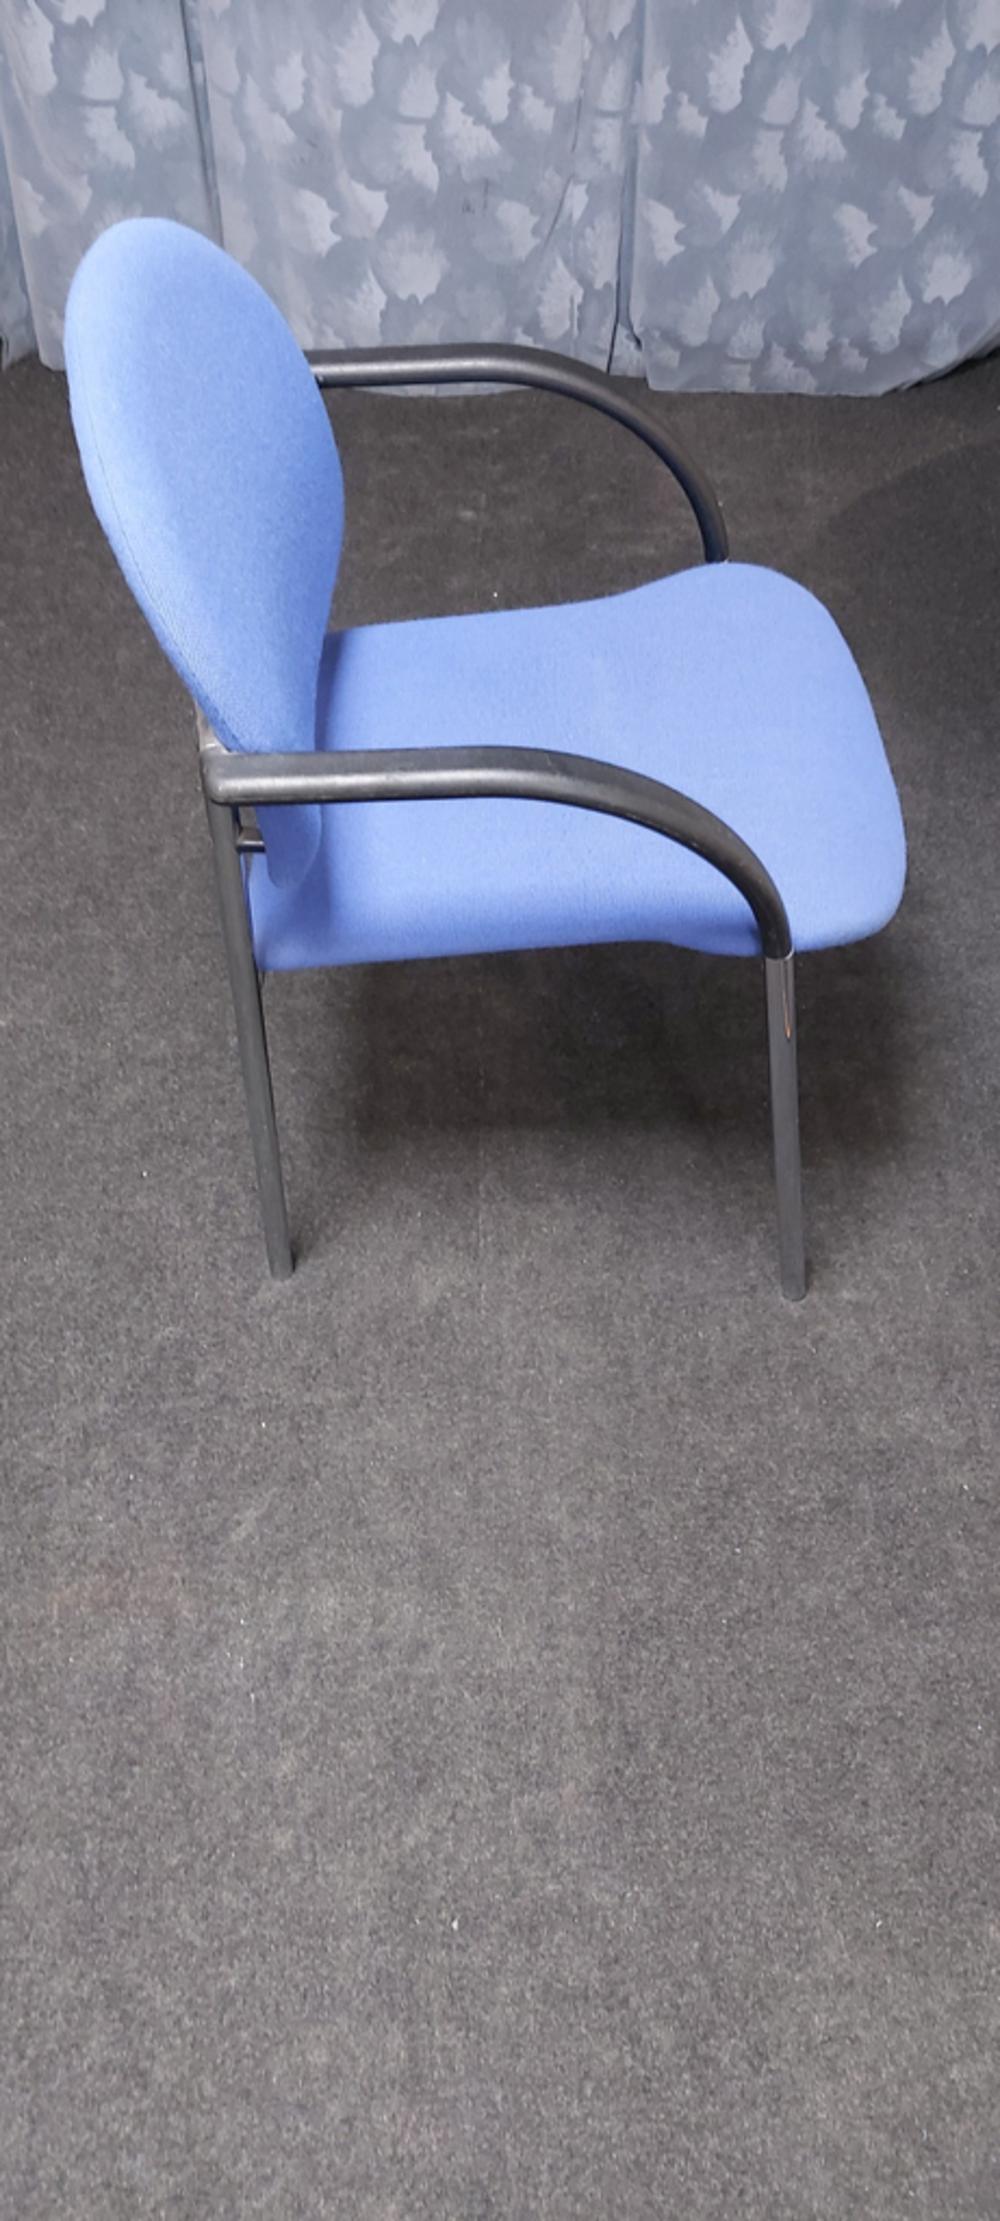 Blue Side Chair with Arms